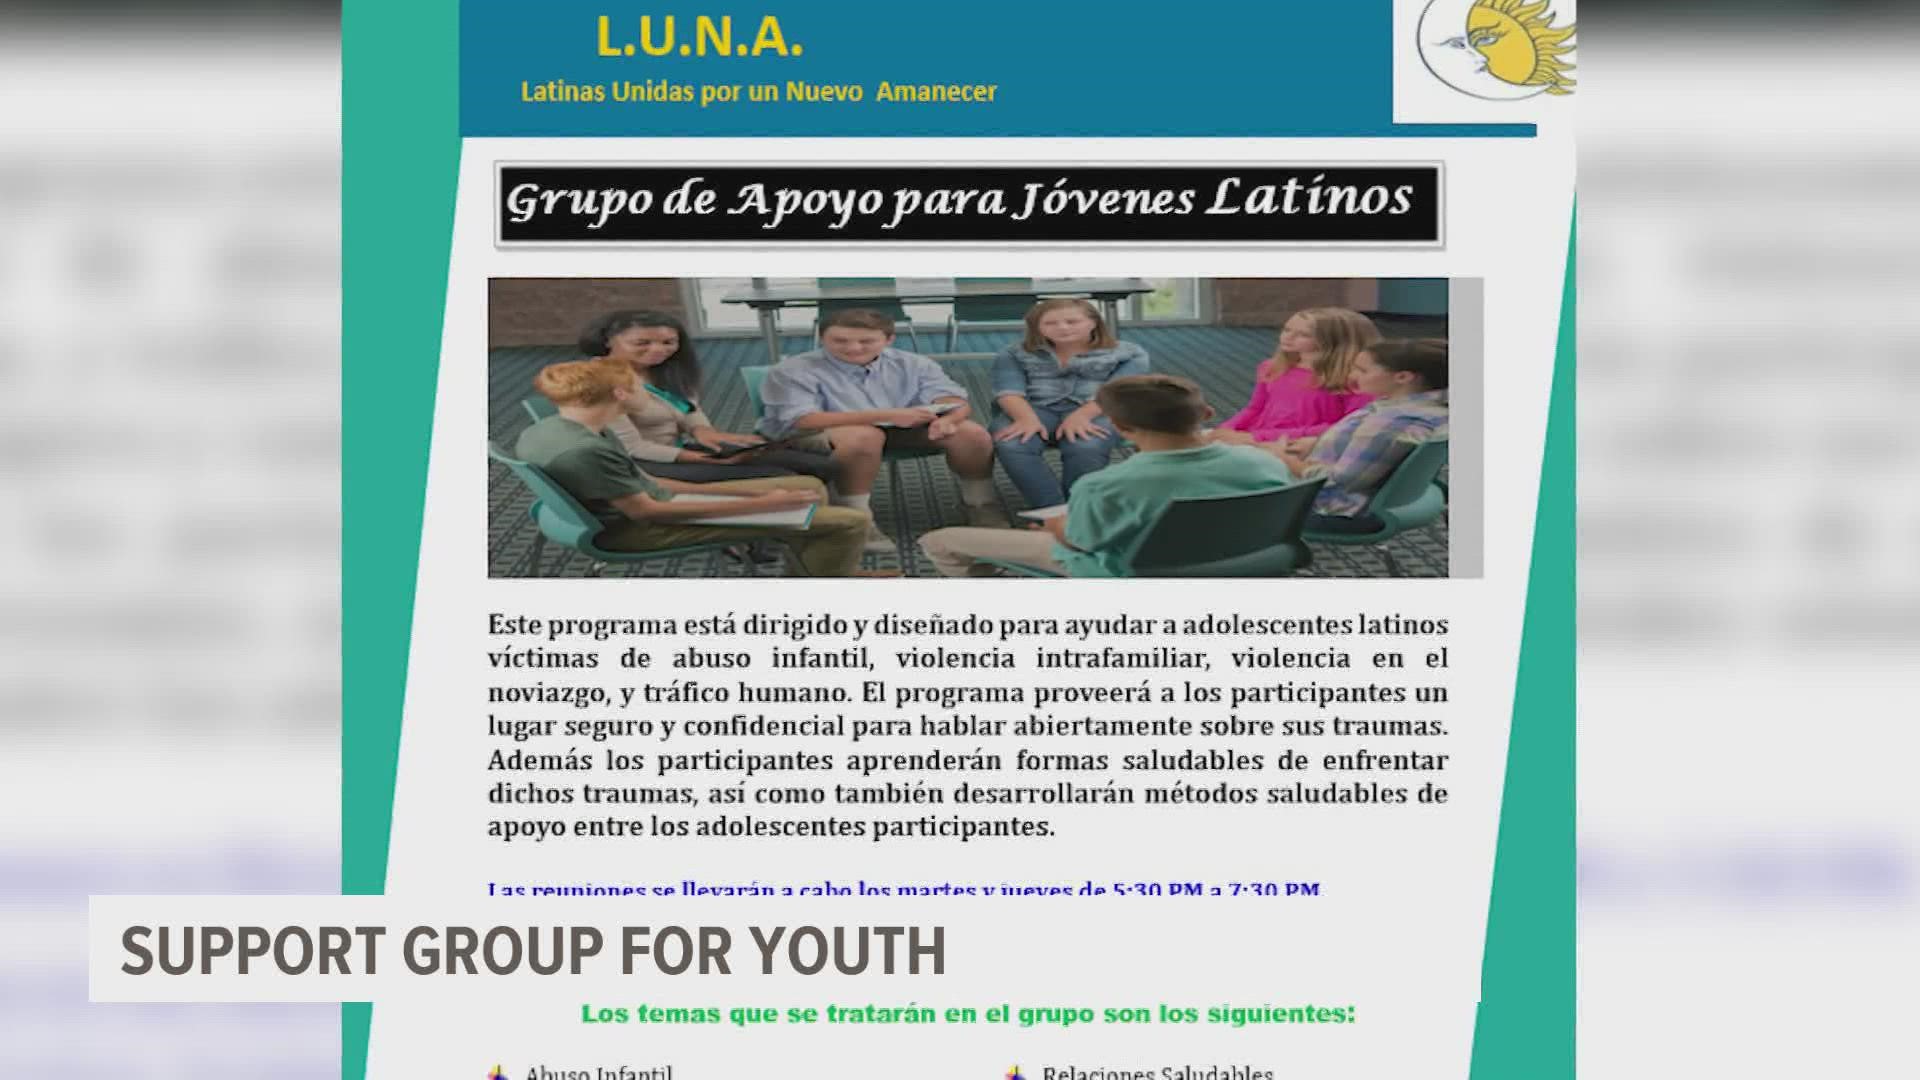 L.U.N.A is creating a support group for Latino teens in the metro to help them deal with trauma.